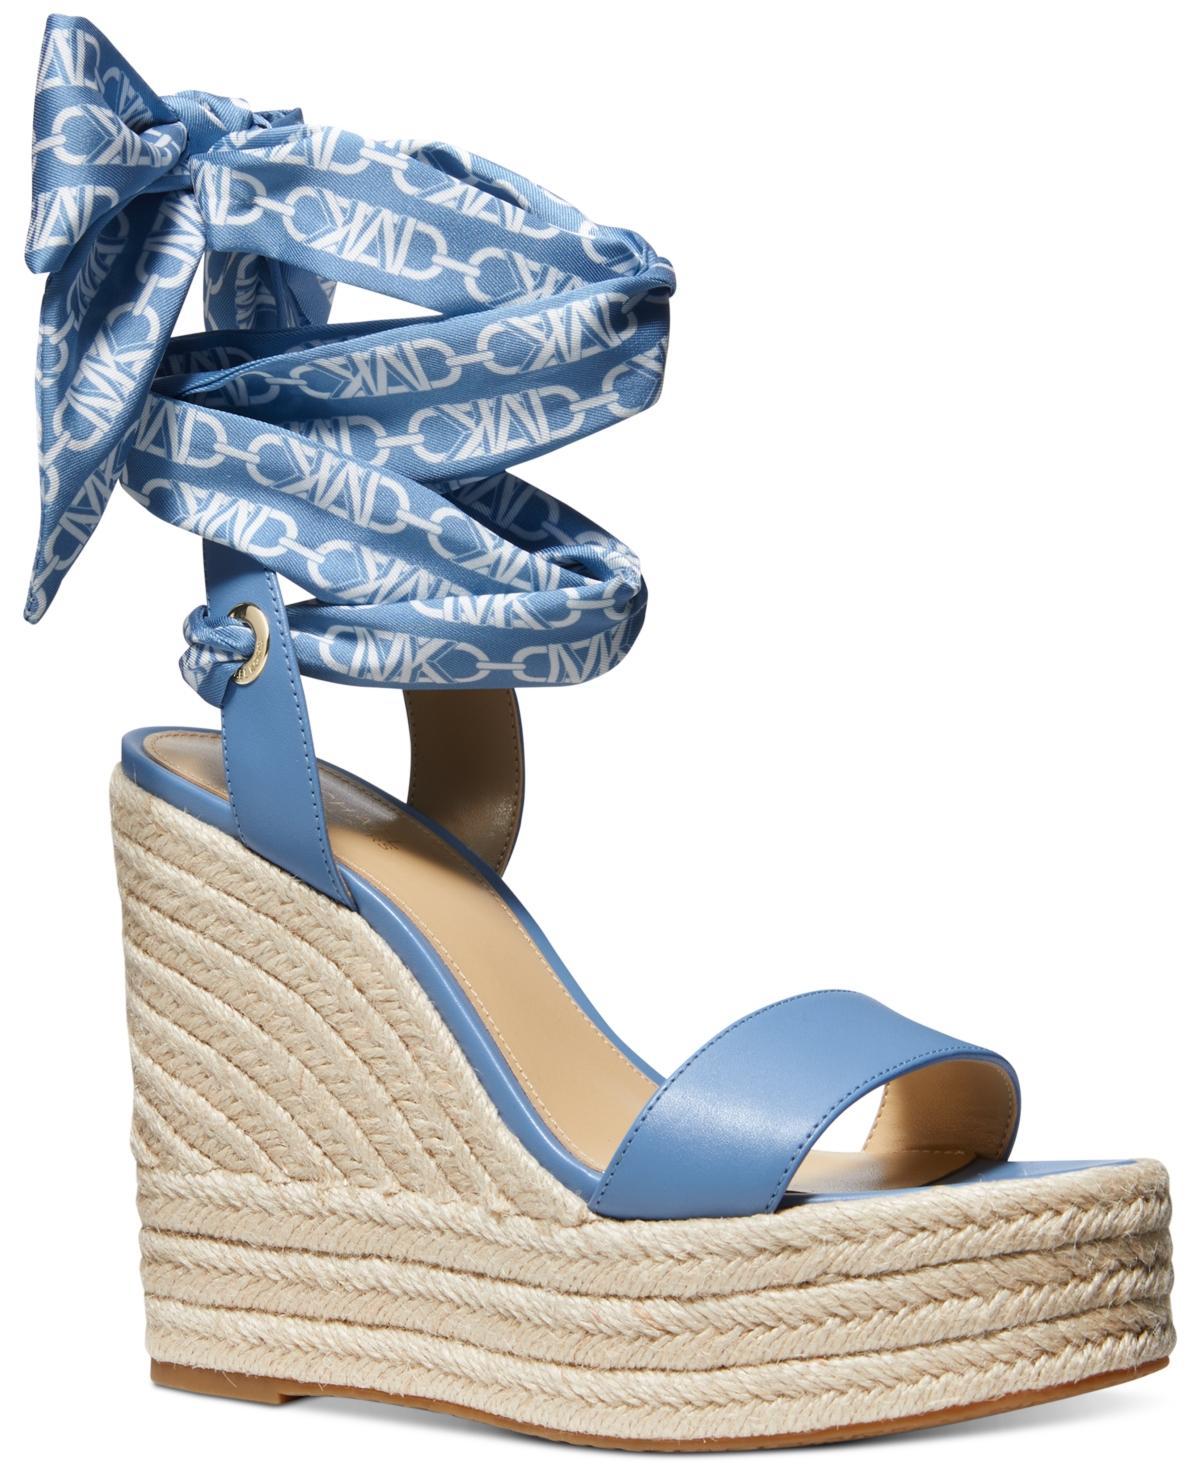 MICHAEL Michael Kors Esme Wedge Espadrille (French ) Women's Shoes Product Image